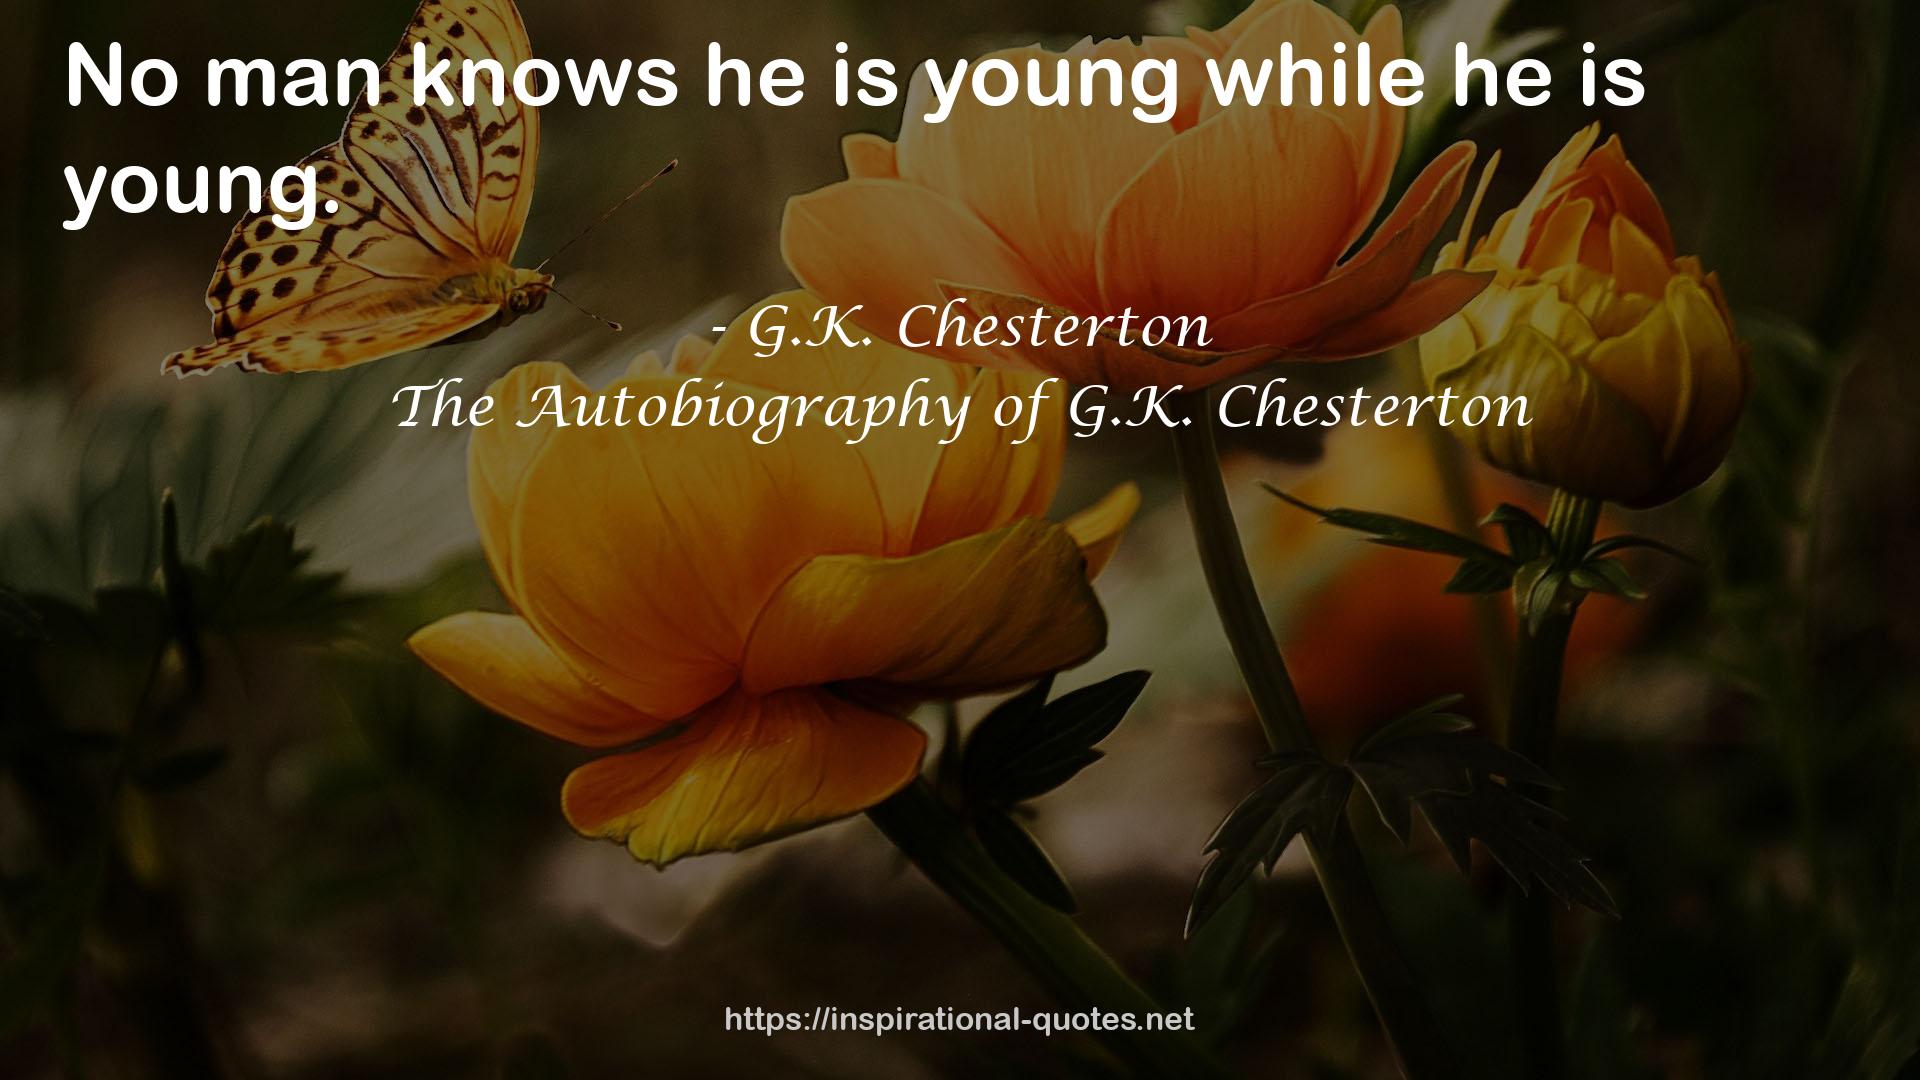 The Autobiography of G.K. Chesterton QUOTES